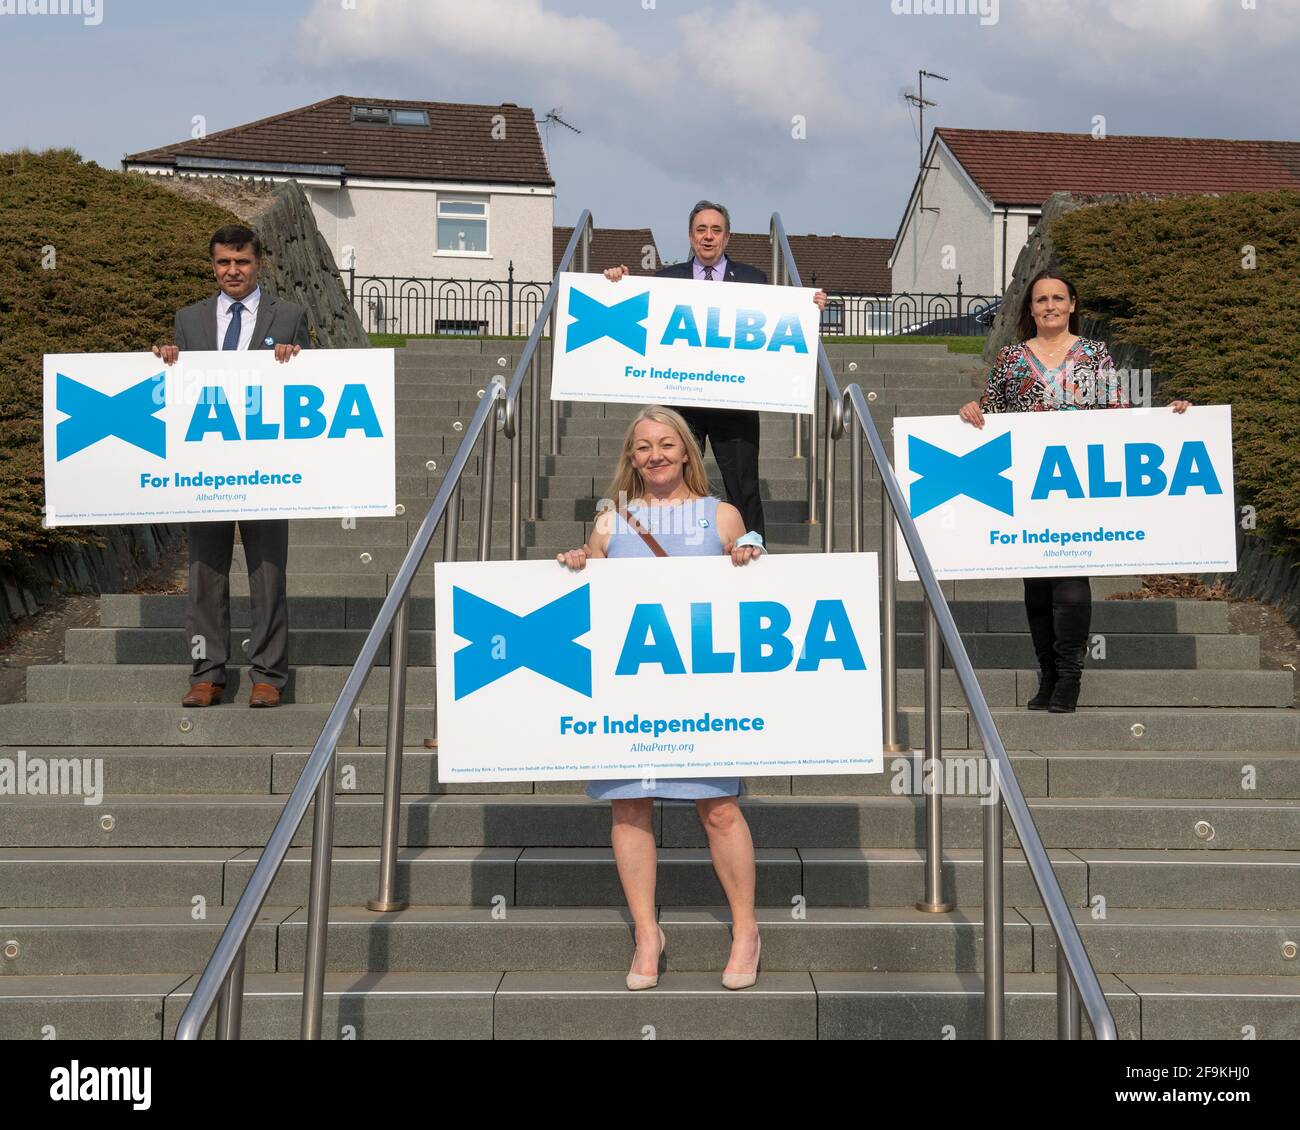 Glasgow, Scotland, UK. 19 April 2021. PICTURED: Alex Salmond Leader of the Alba Party (top) marks the start of the ALBA Glasgow campaign with ALBA Glasgow Candidates: (bottom) Cllr Michelle Ferns, (right) Ailsa Gray, (left) Cllr Shahid Farooq and Lynn McMahon. Mr Salmond will outline ALBA's plans to enhance the Educational Maintenance Allowance and Cllr Ferns will set out how ALBA intend to provide Financial support to taxi drivers and private hire drivers. Speaking in advance of the Photo call ALBA Party Leader Alex Salmond said: “ Today we are announcing targeted measures to support you Stock Photo